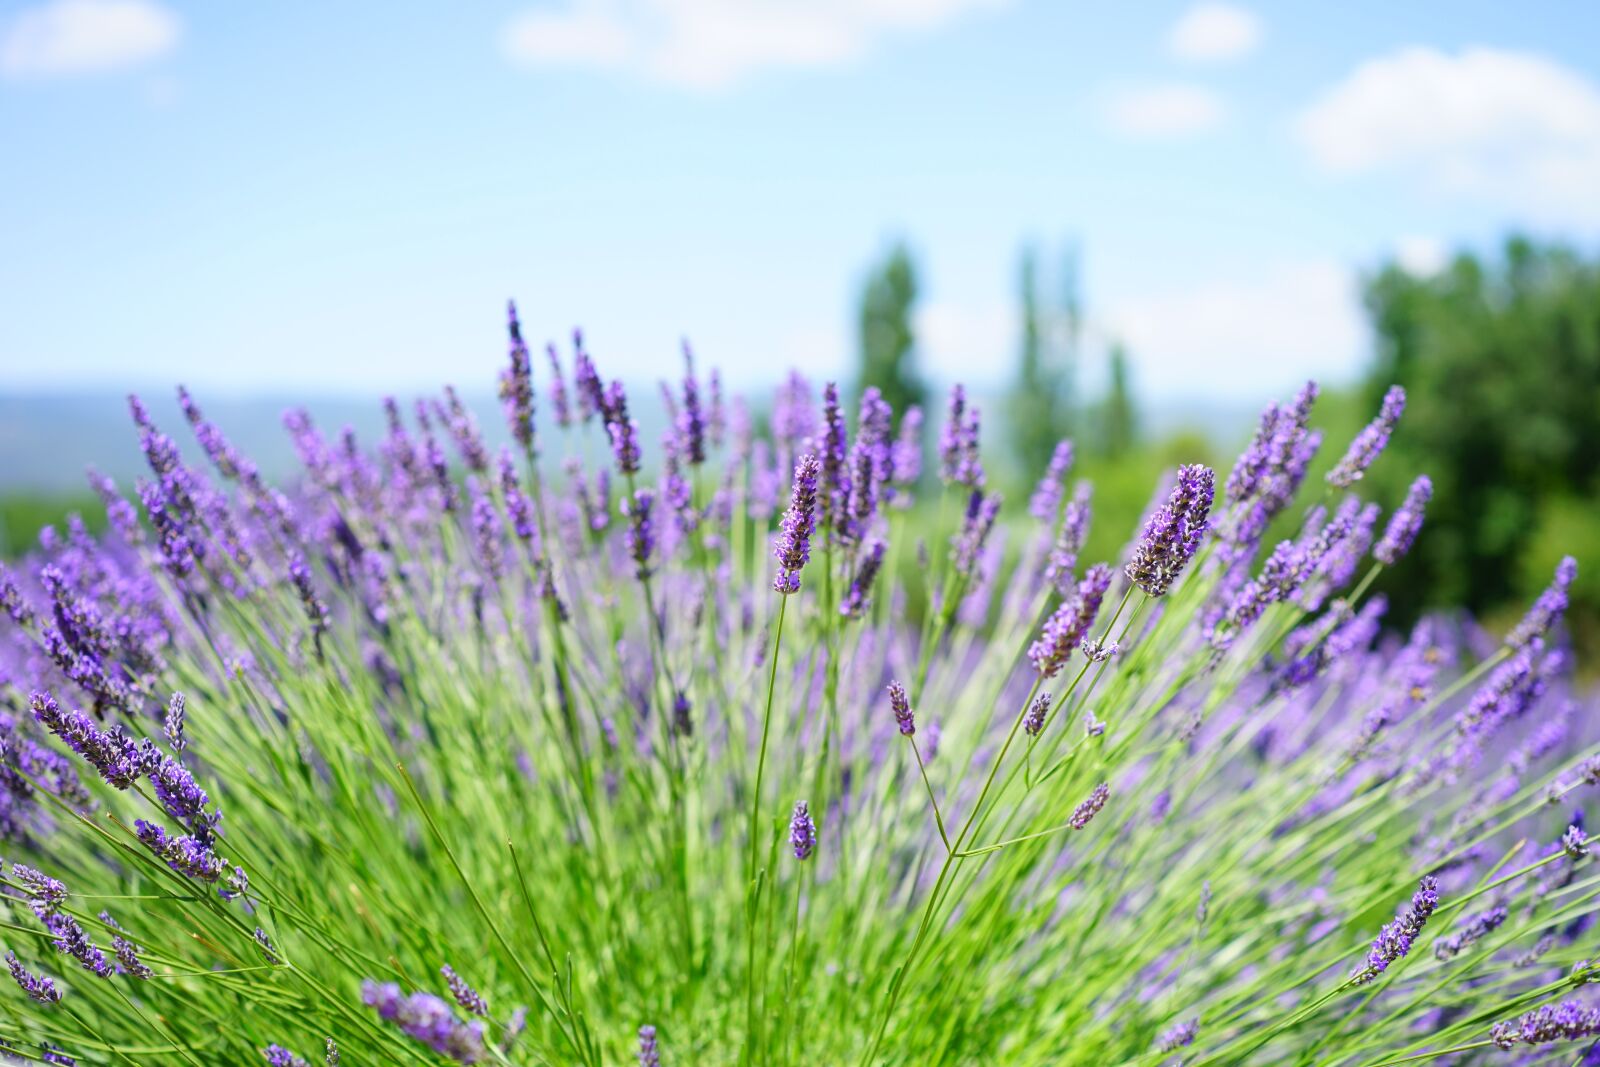 Sony a7 sample photo. Lavender field, flowers, purple photography